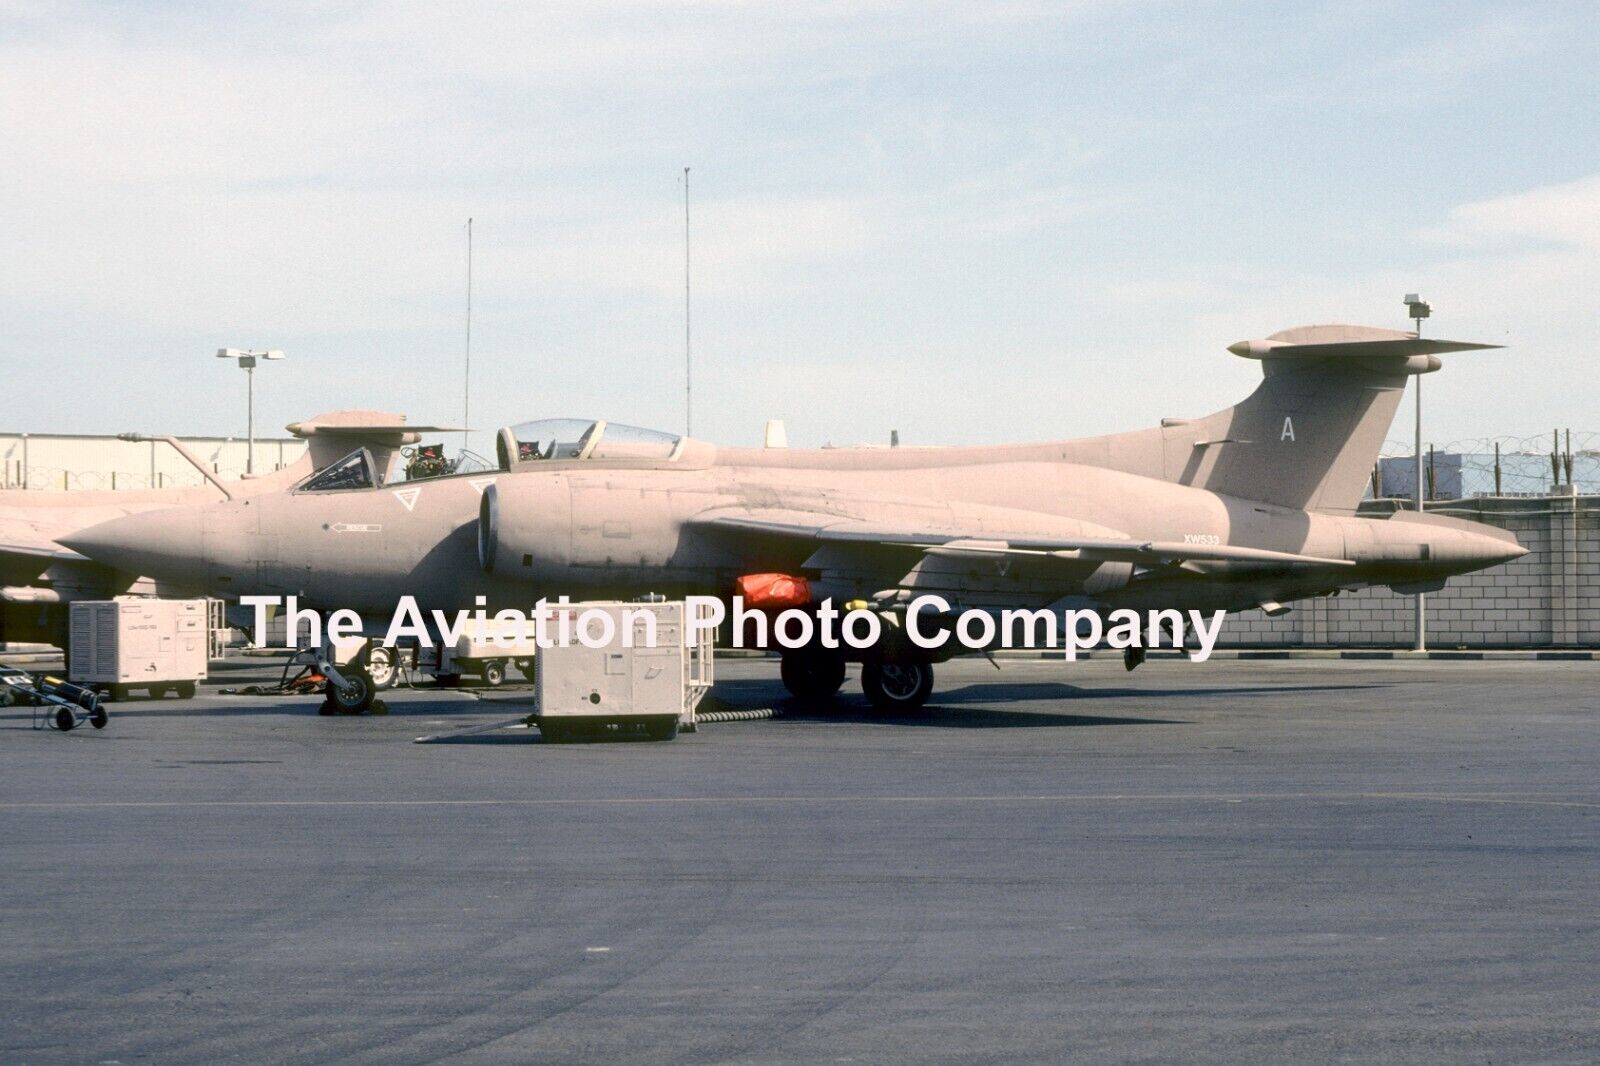 RAF Blackburn Buccaneer S.2 XW533/A during Operation Granby (1991) Photograph